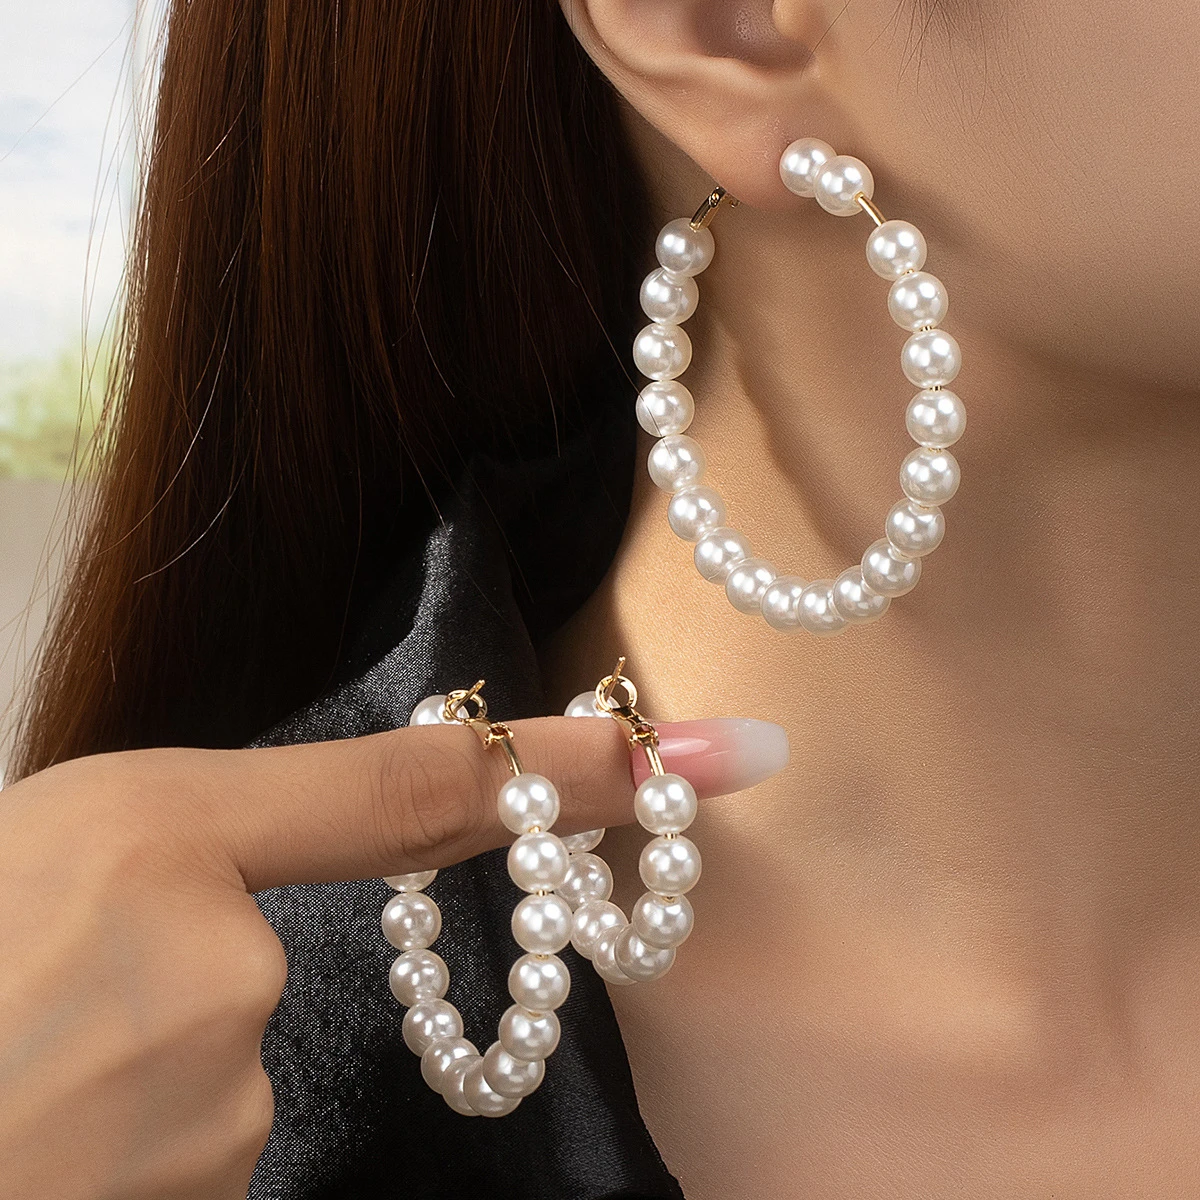 Pearl Drop Earrings For Girls and Women -1 Pair